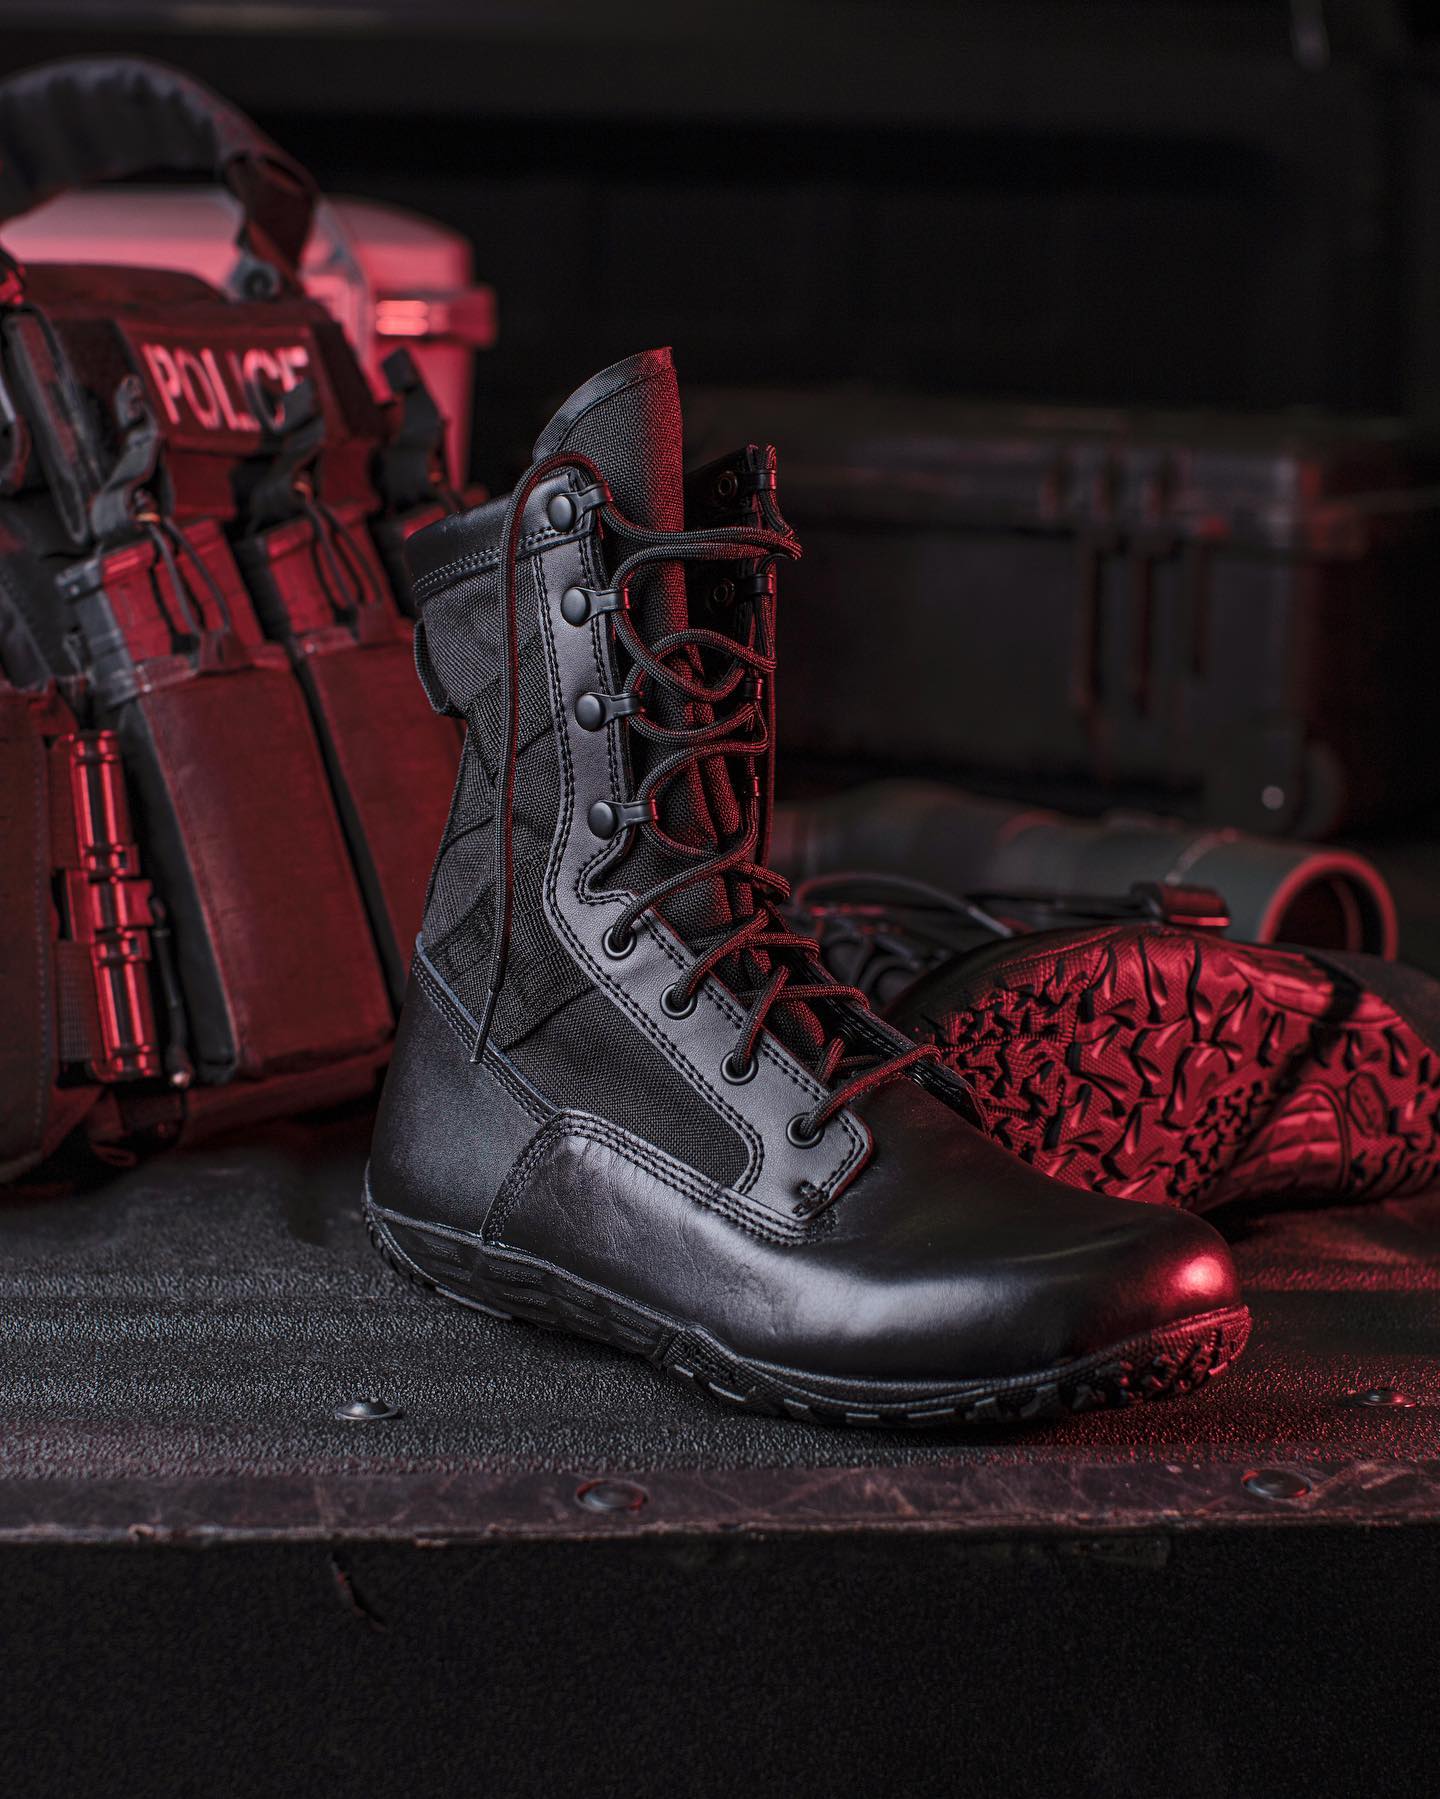 BELLEVILLE TACTICAL RESEARCH TR102 / Minimalist Training Boots